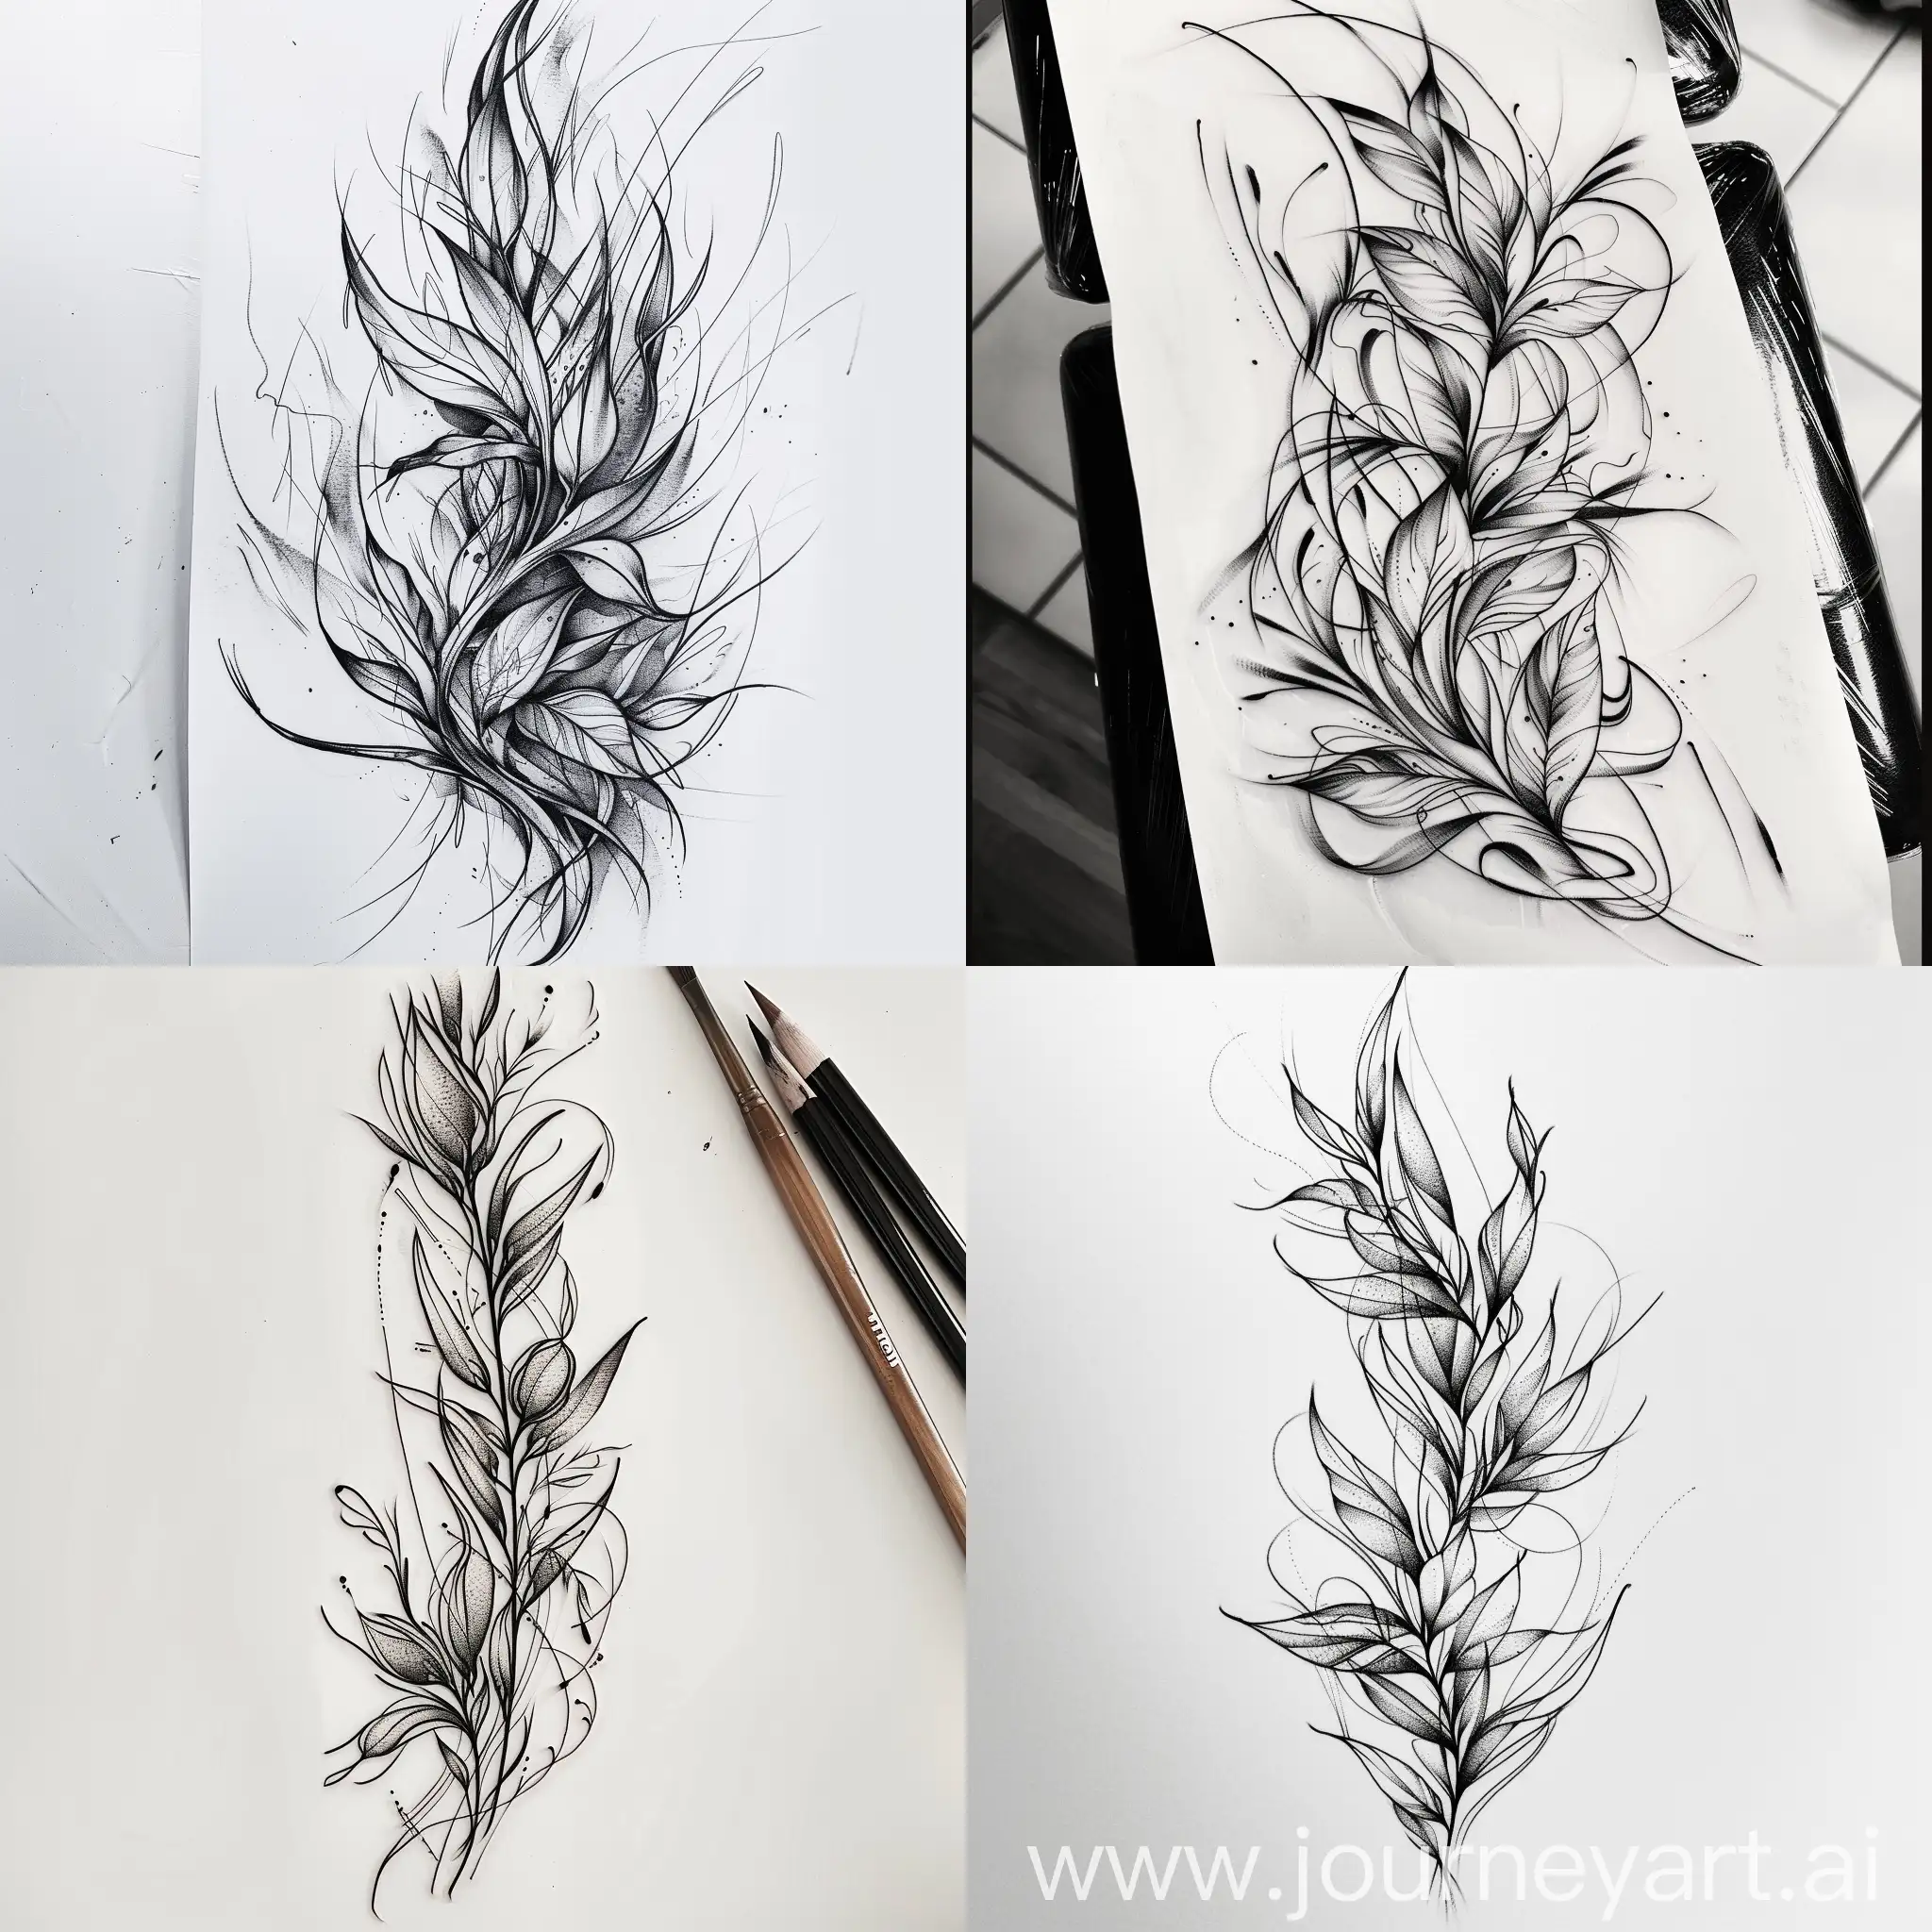 Create a sketch for a tattoo from lines and brush strokes, with a plant theme.